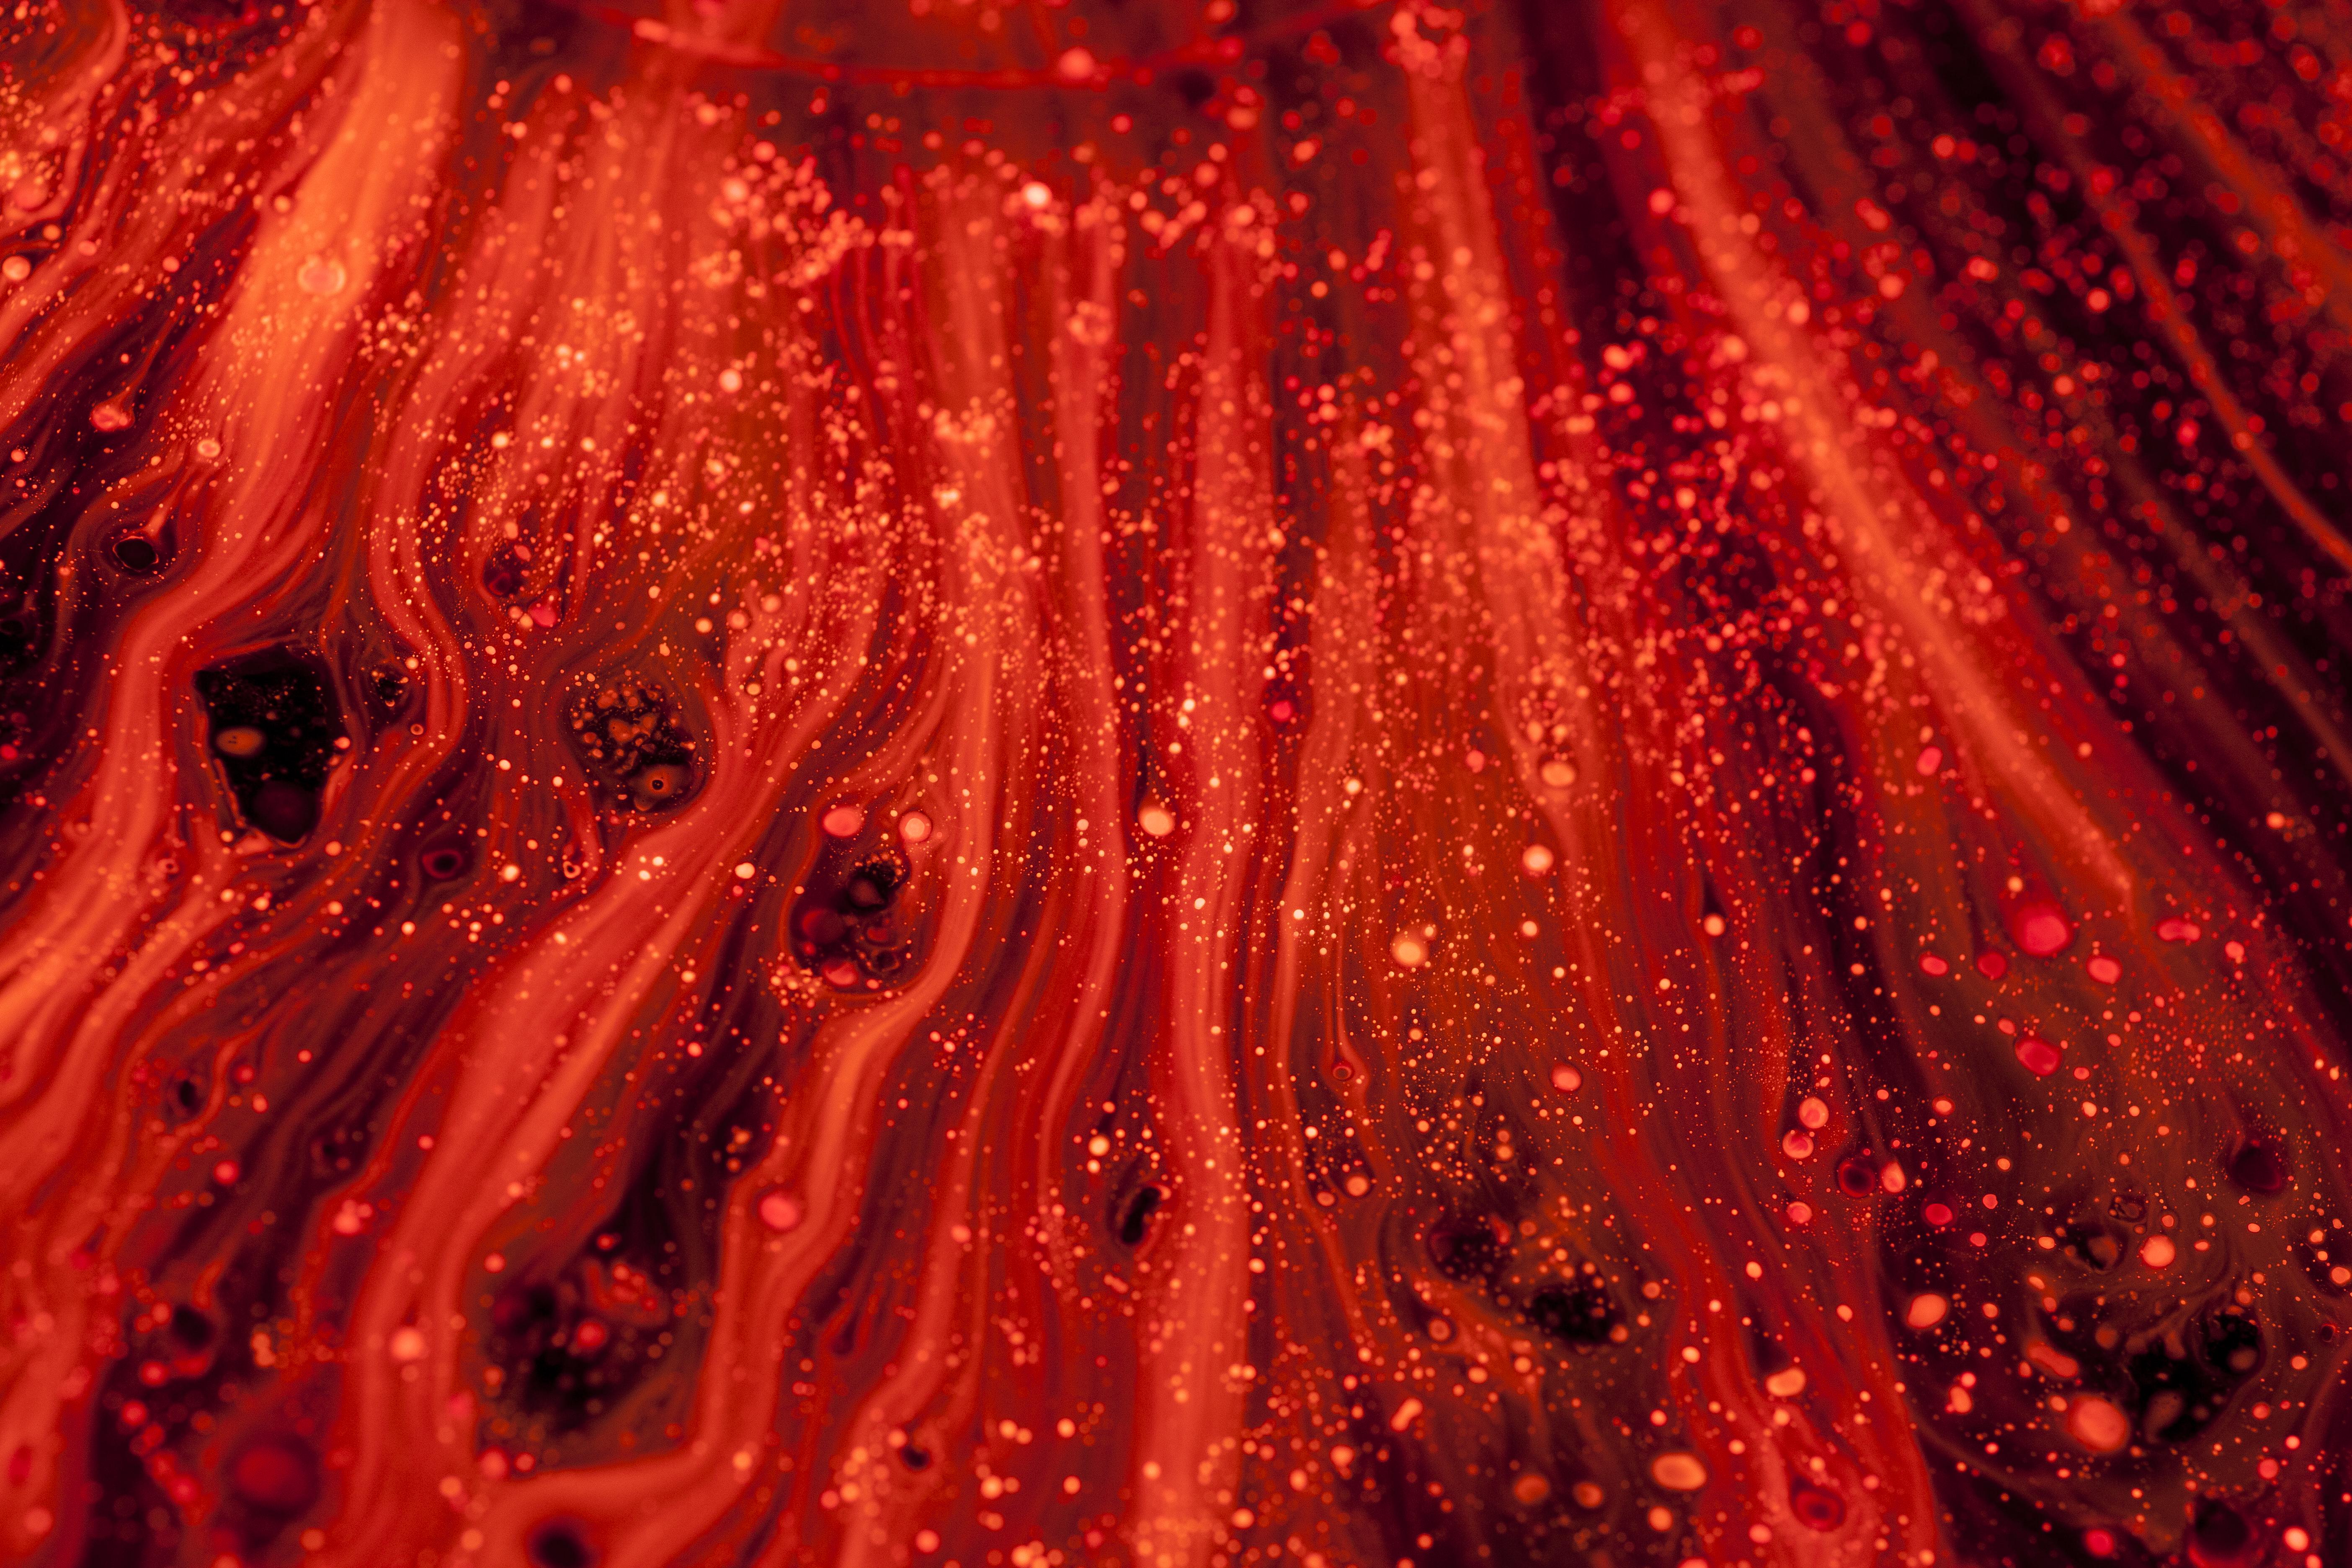 96735 download wallpaper abstract, red, bright, liquid, tinsel, sequins screensavers and pictures for free